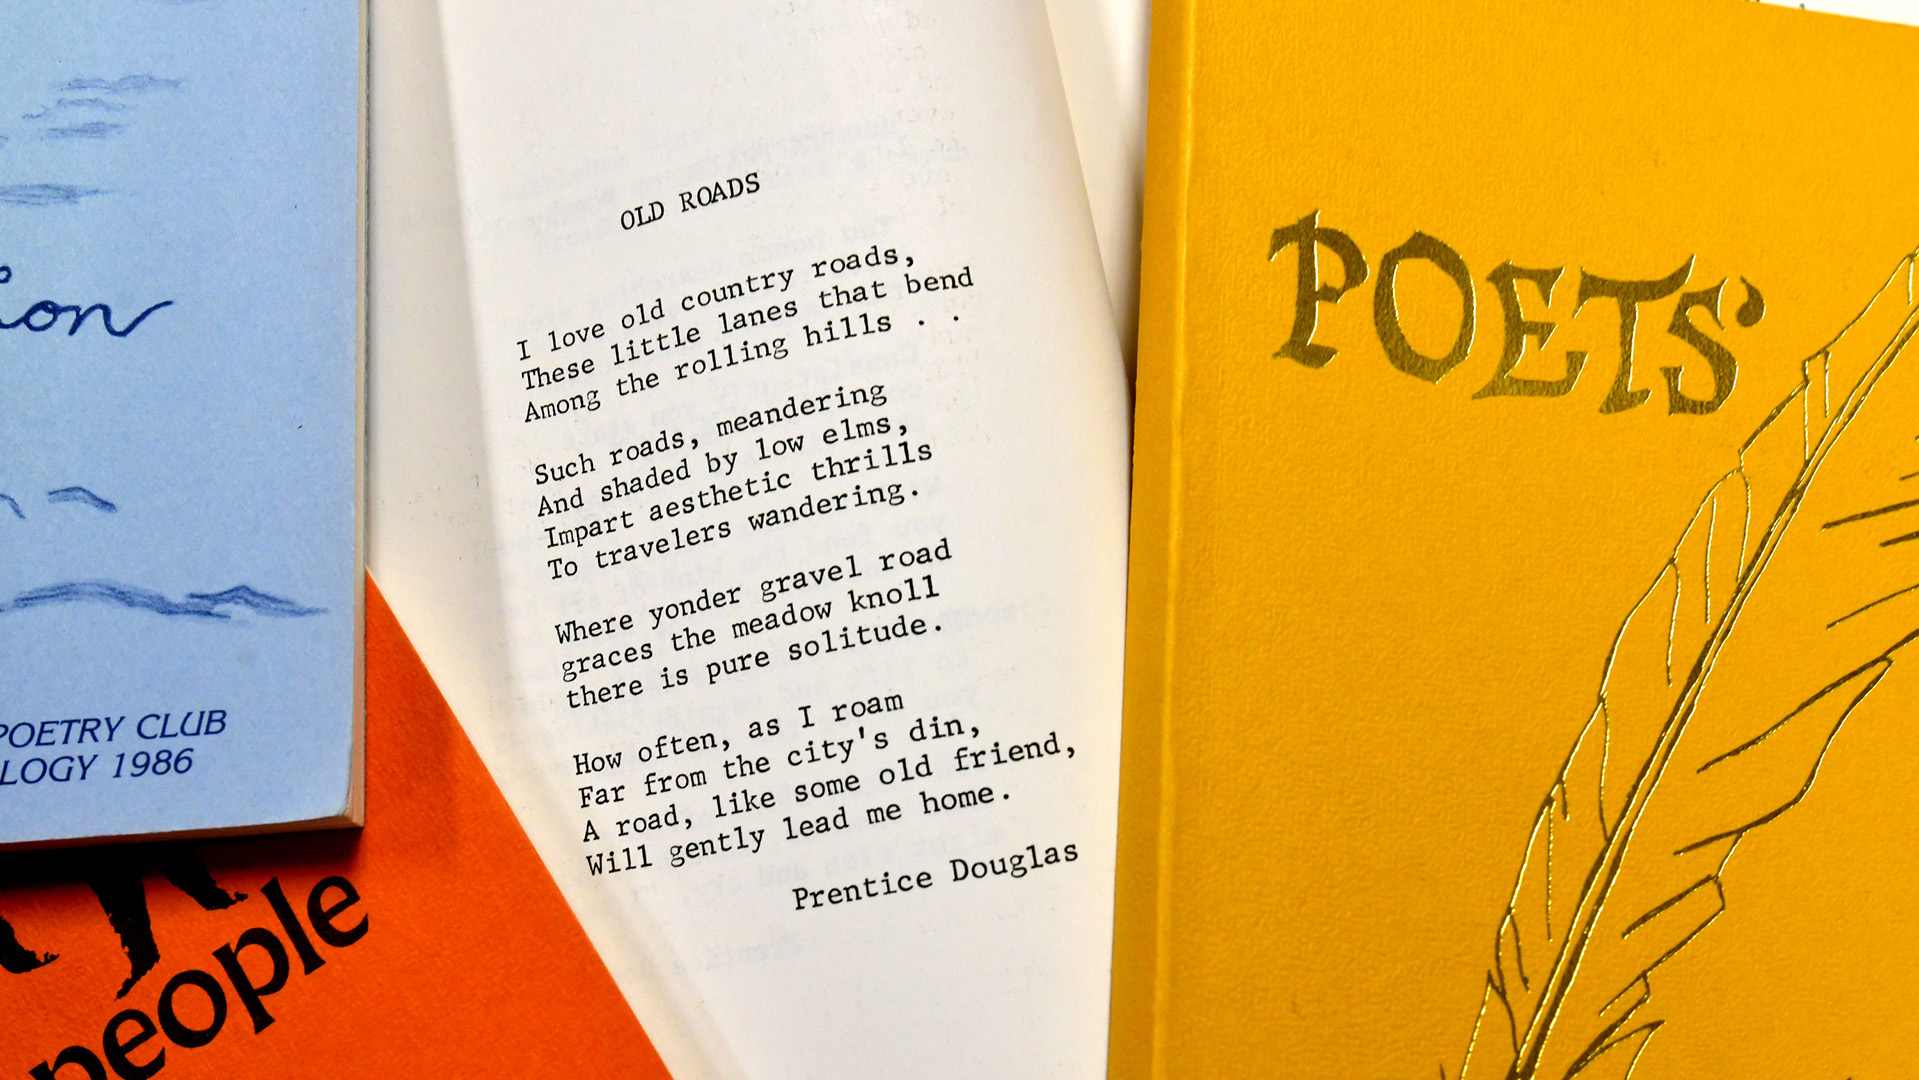 Books of poems form the Peoria Poetry Club’s collection, courtesy of Bradley University's Cullom-Davis Library